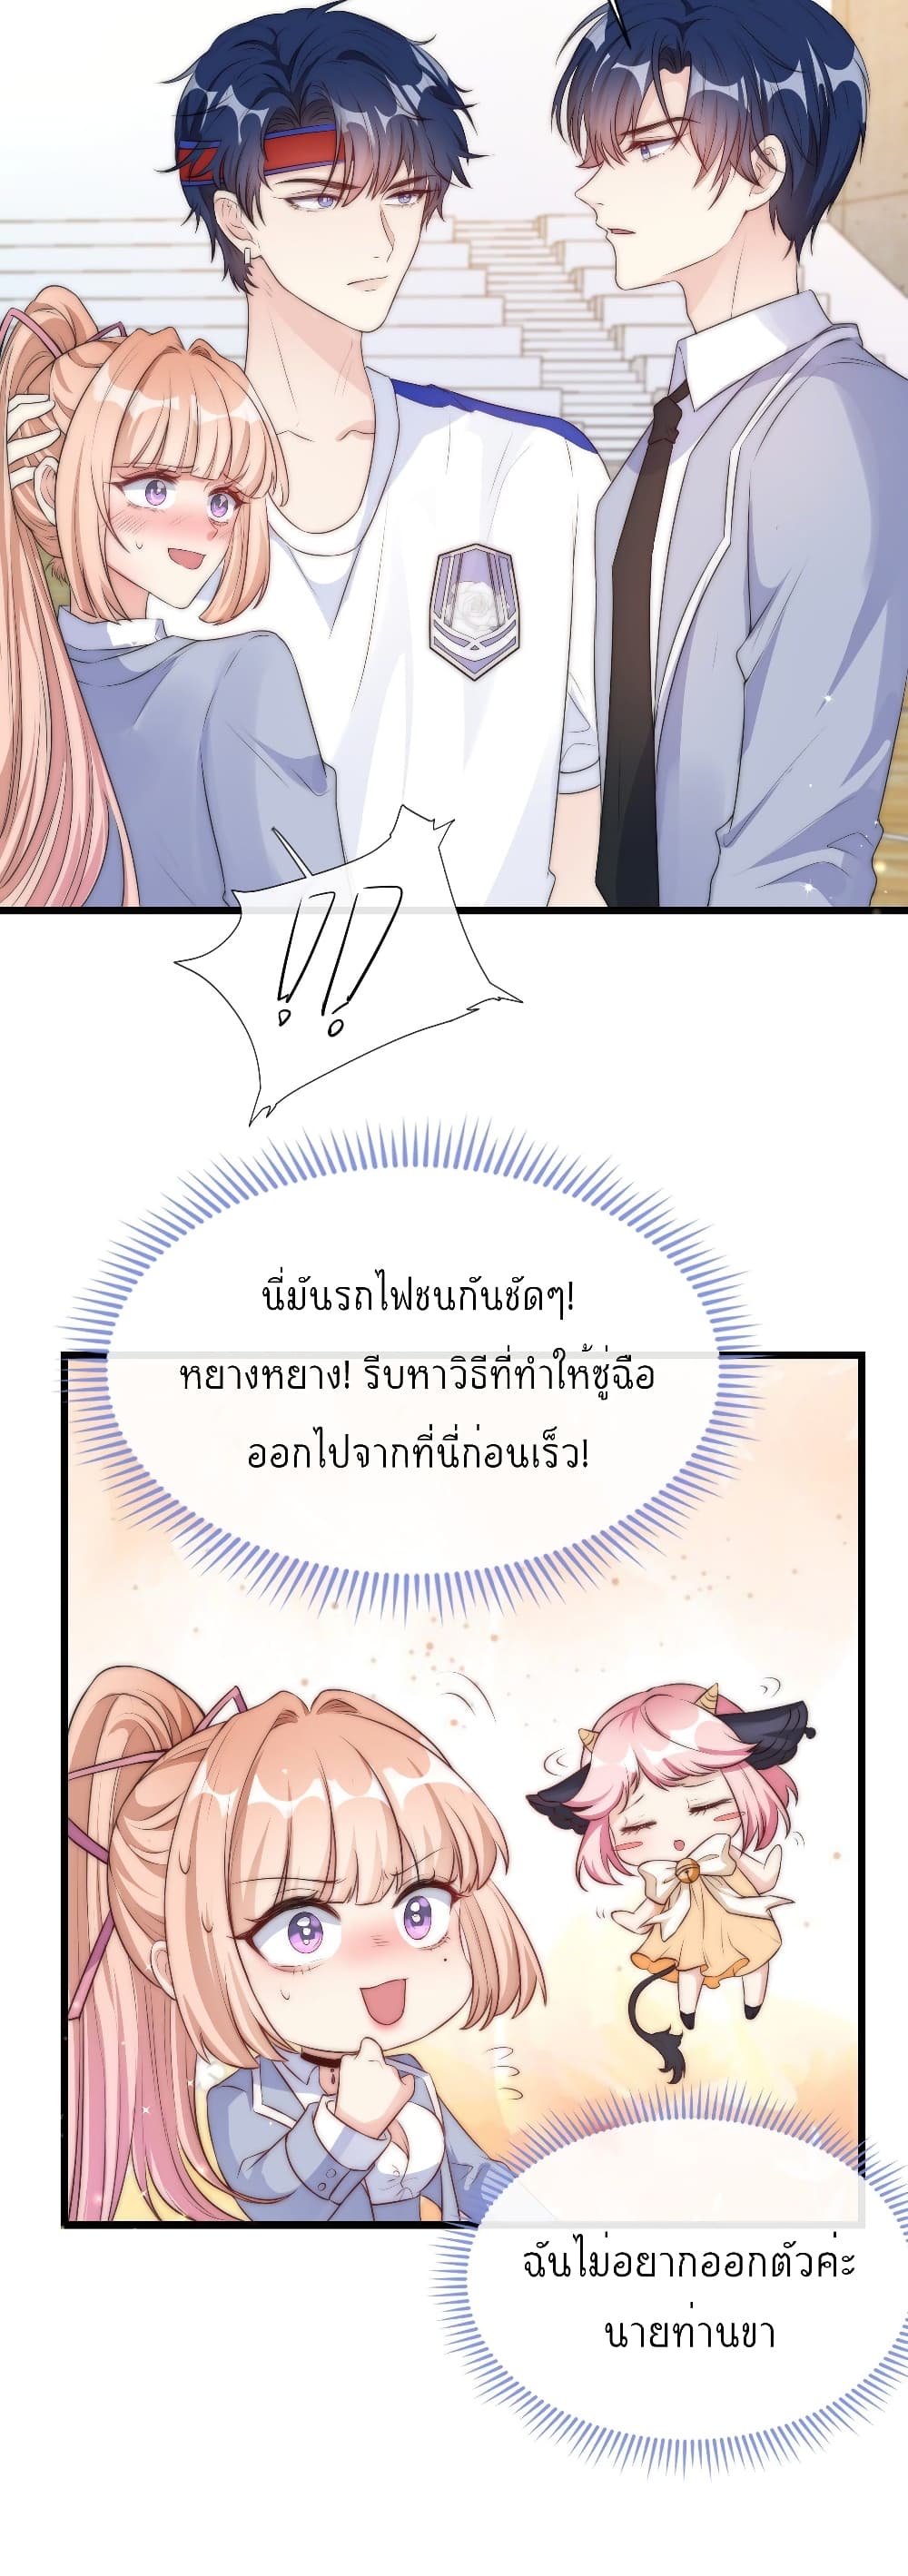 Find Me In Your Meory ตอนที่ 12 (21)